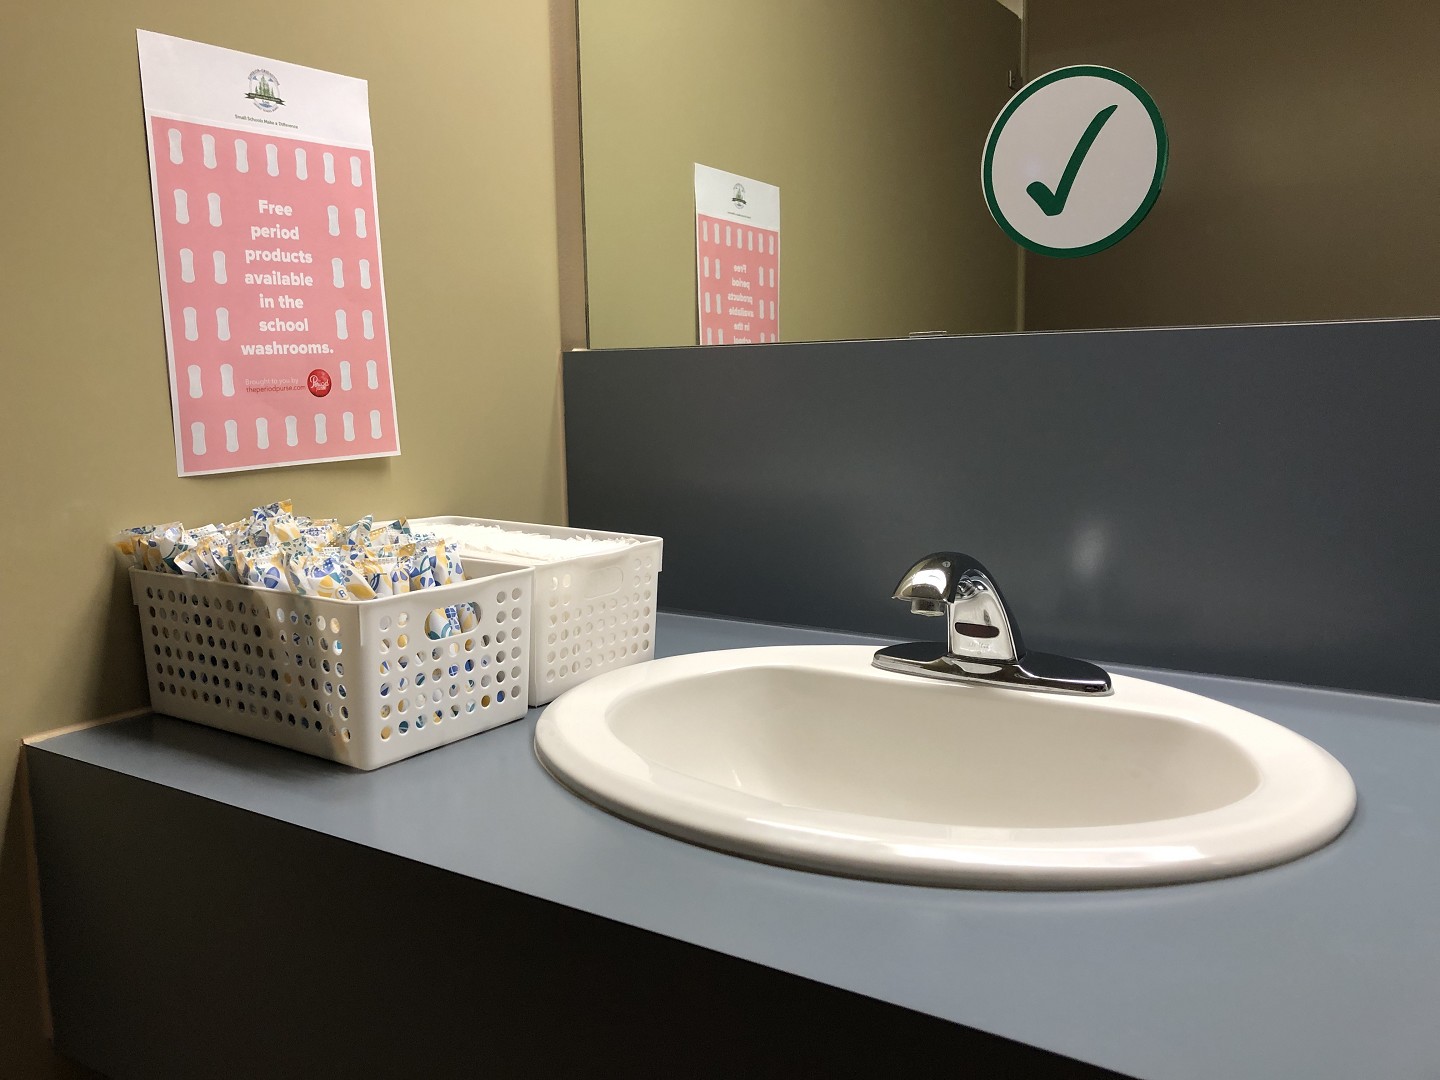 the period purse and sgdsb, menstration products available in the girls restrooms